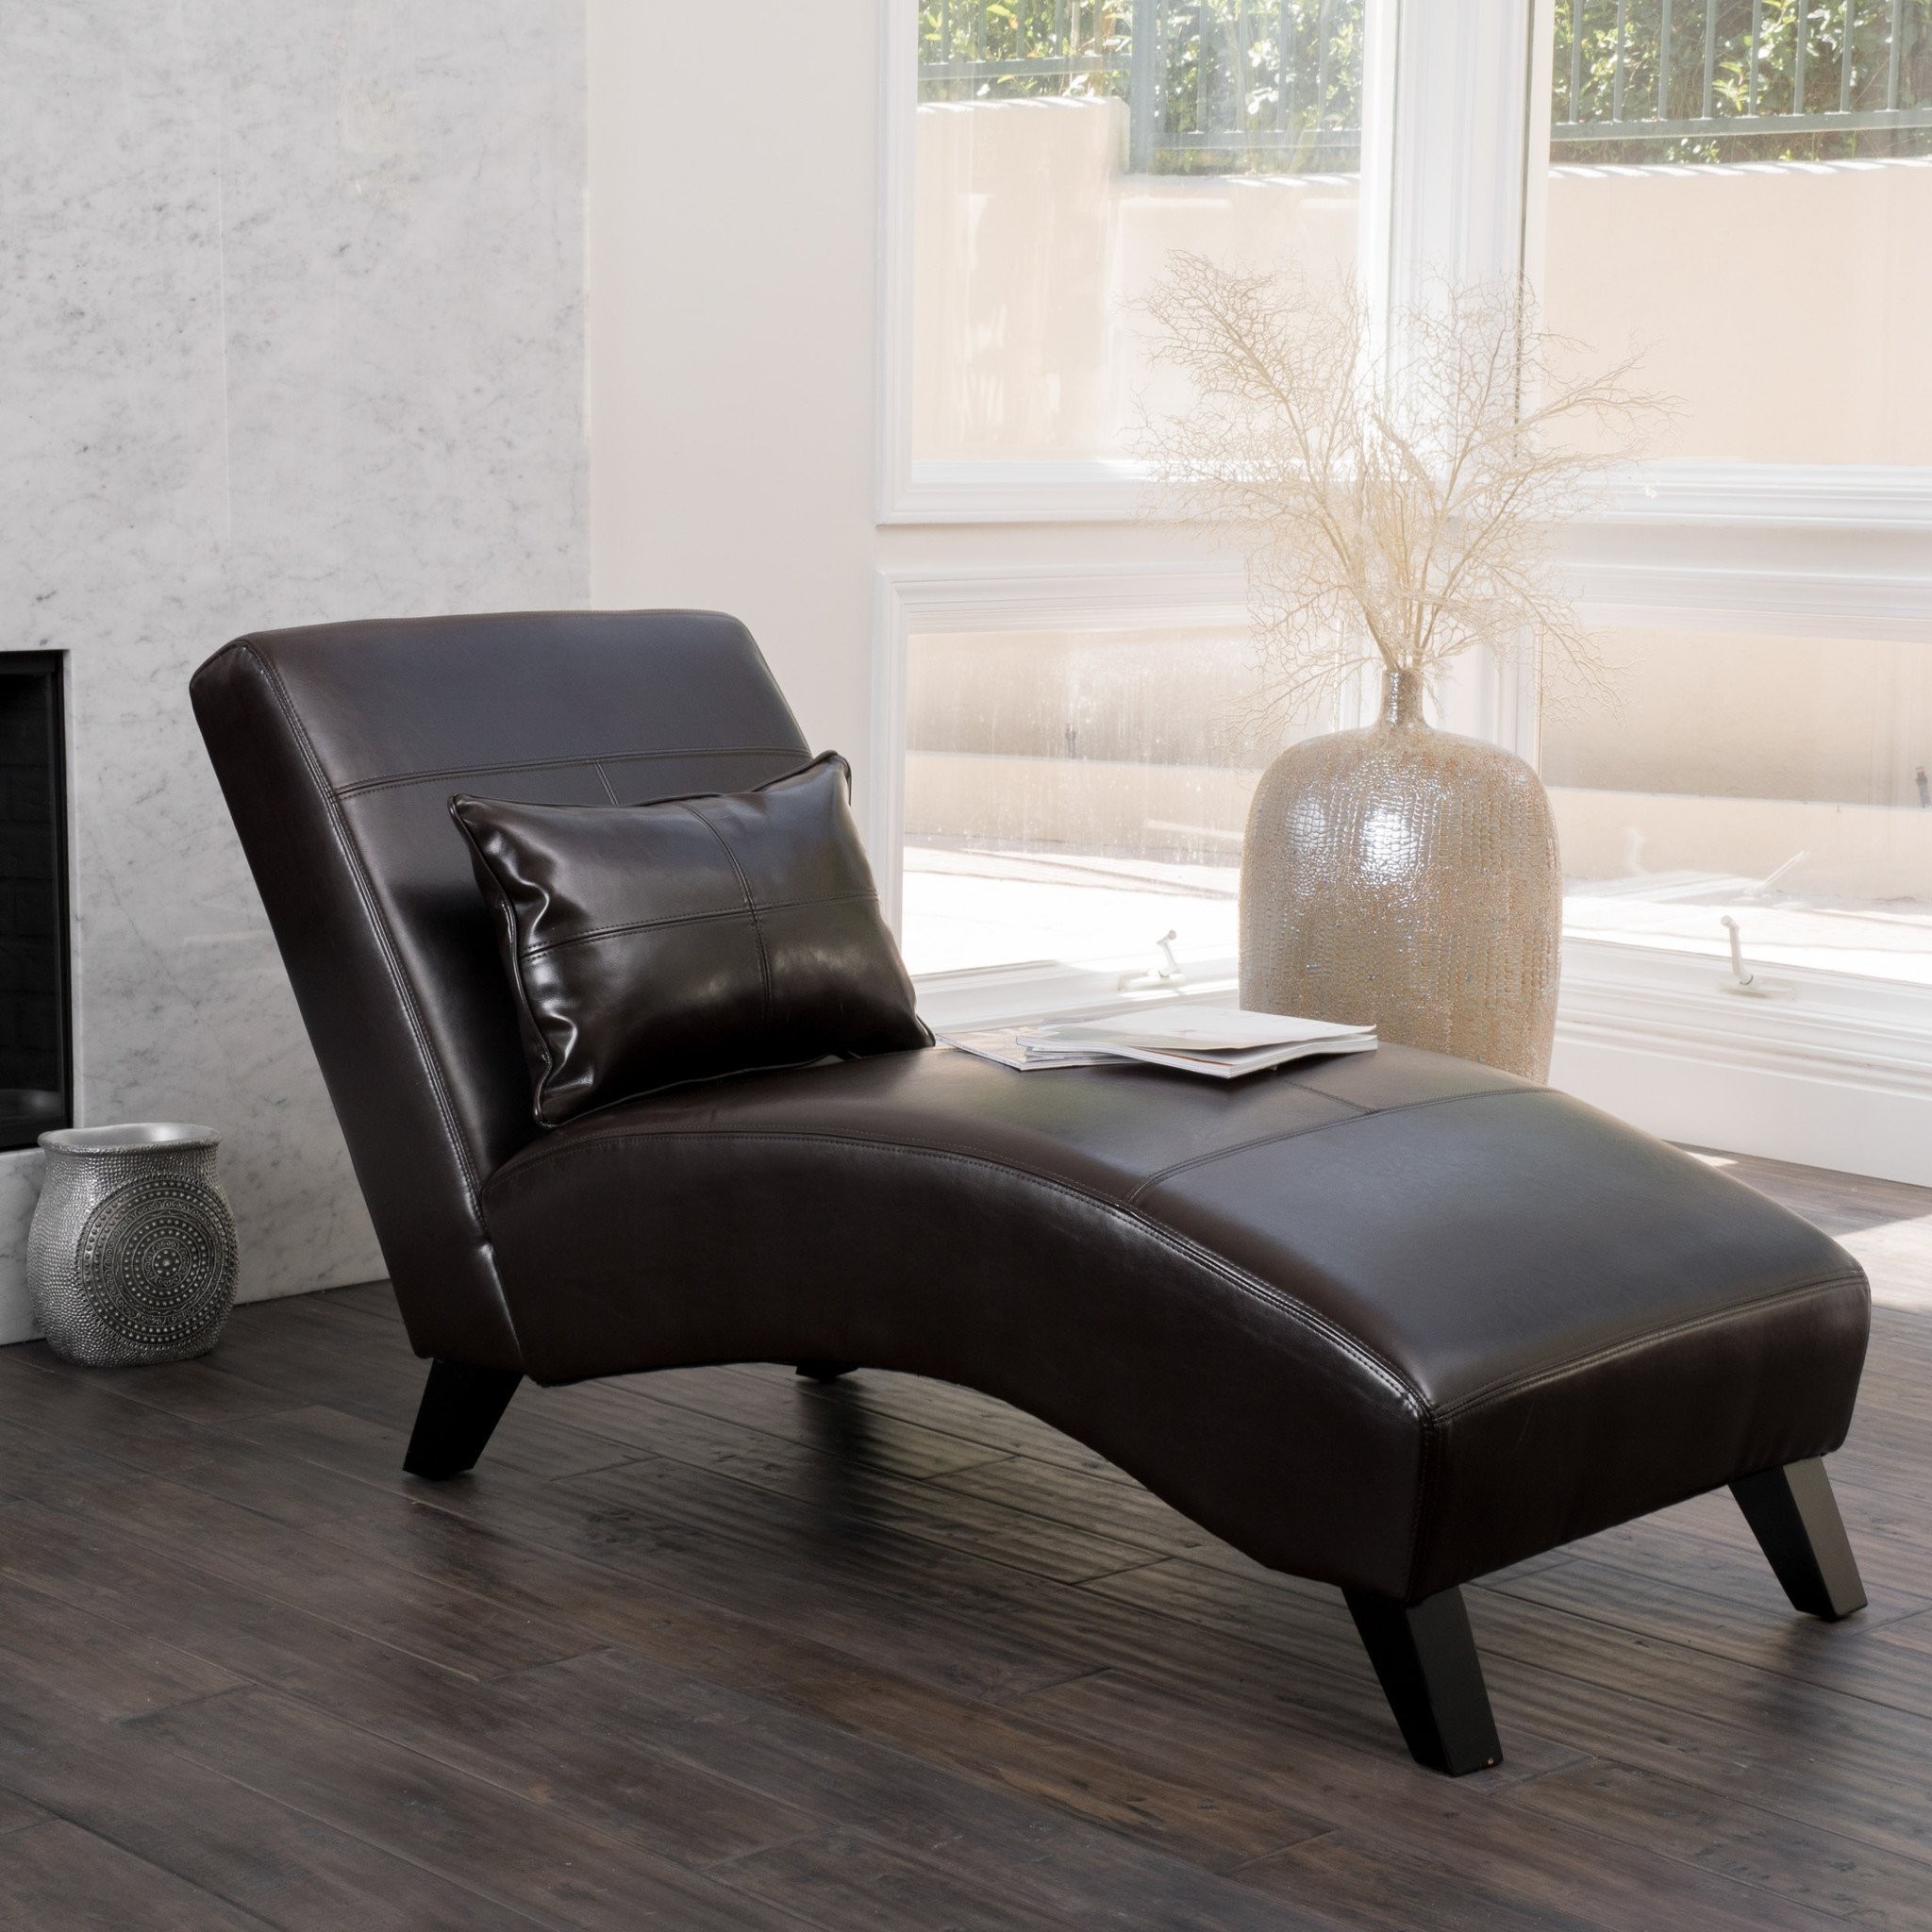 Laguna Brown Leather Curved Chaise Lounge Chair &...